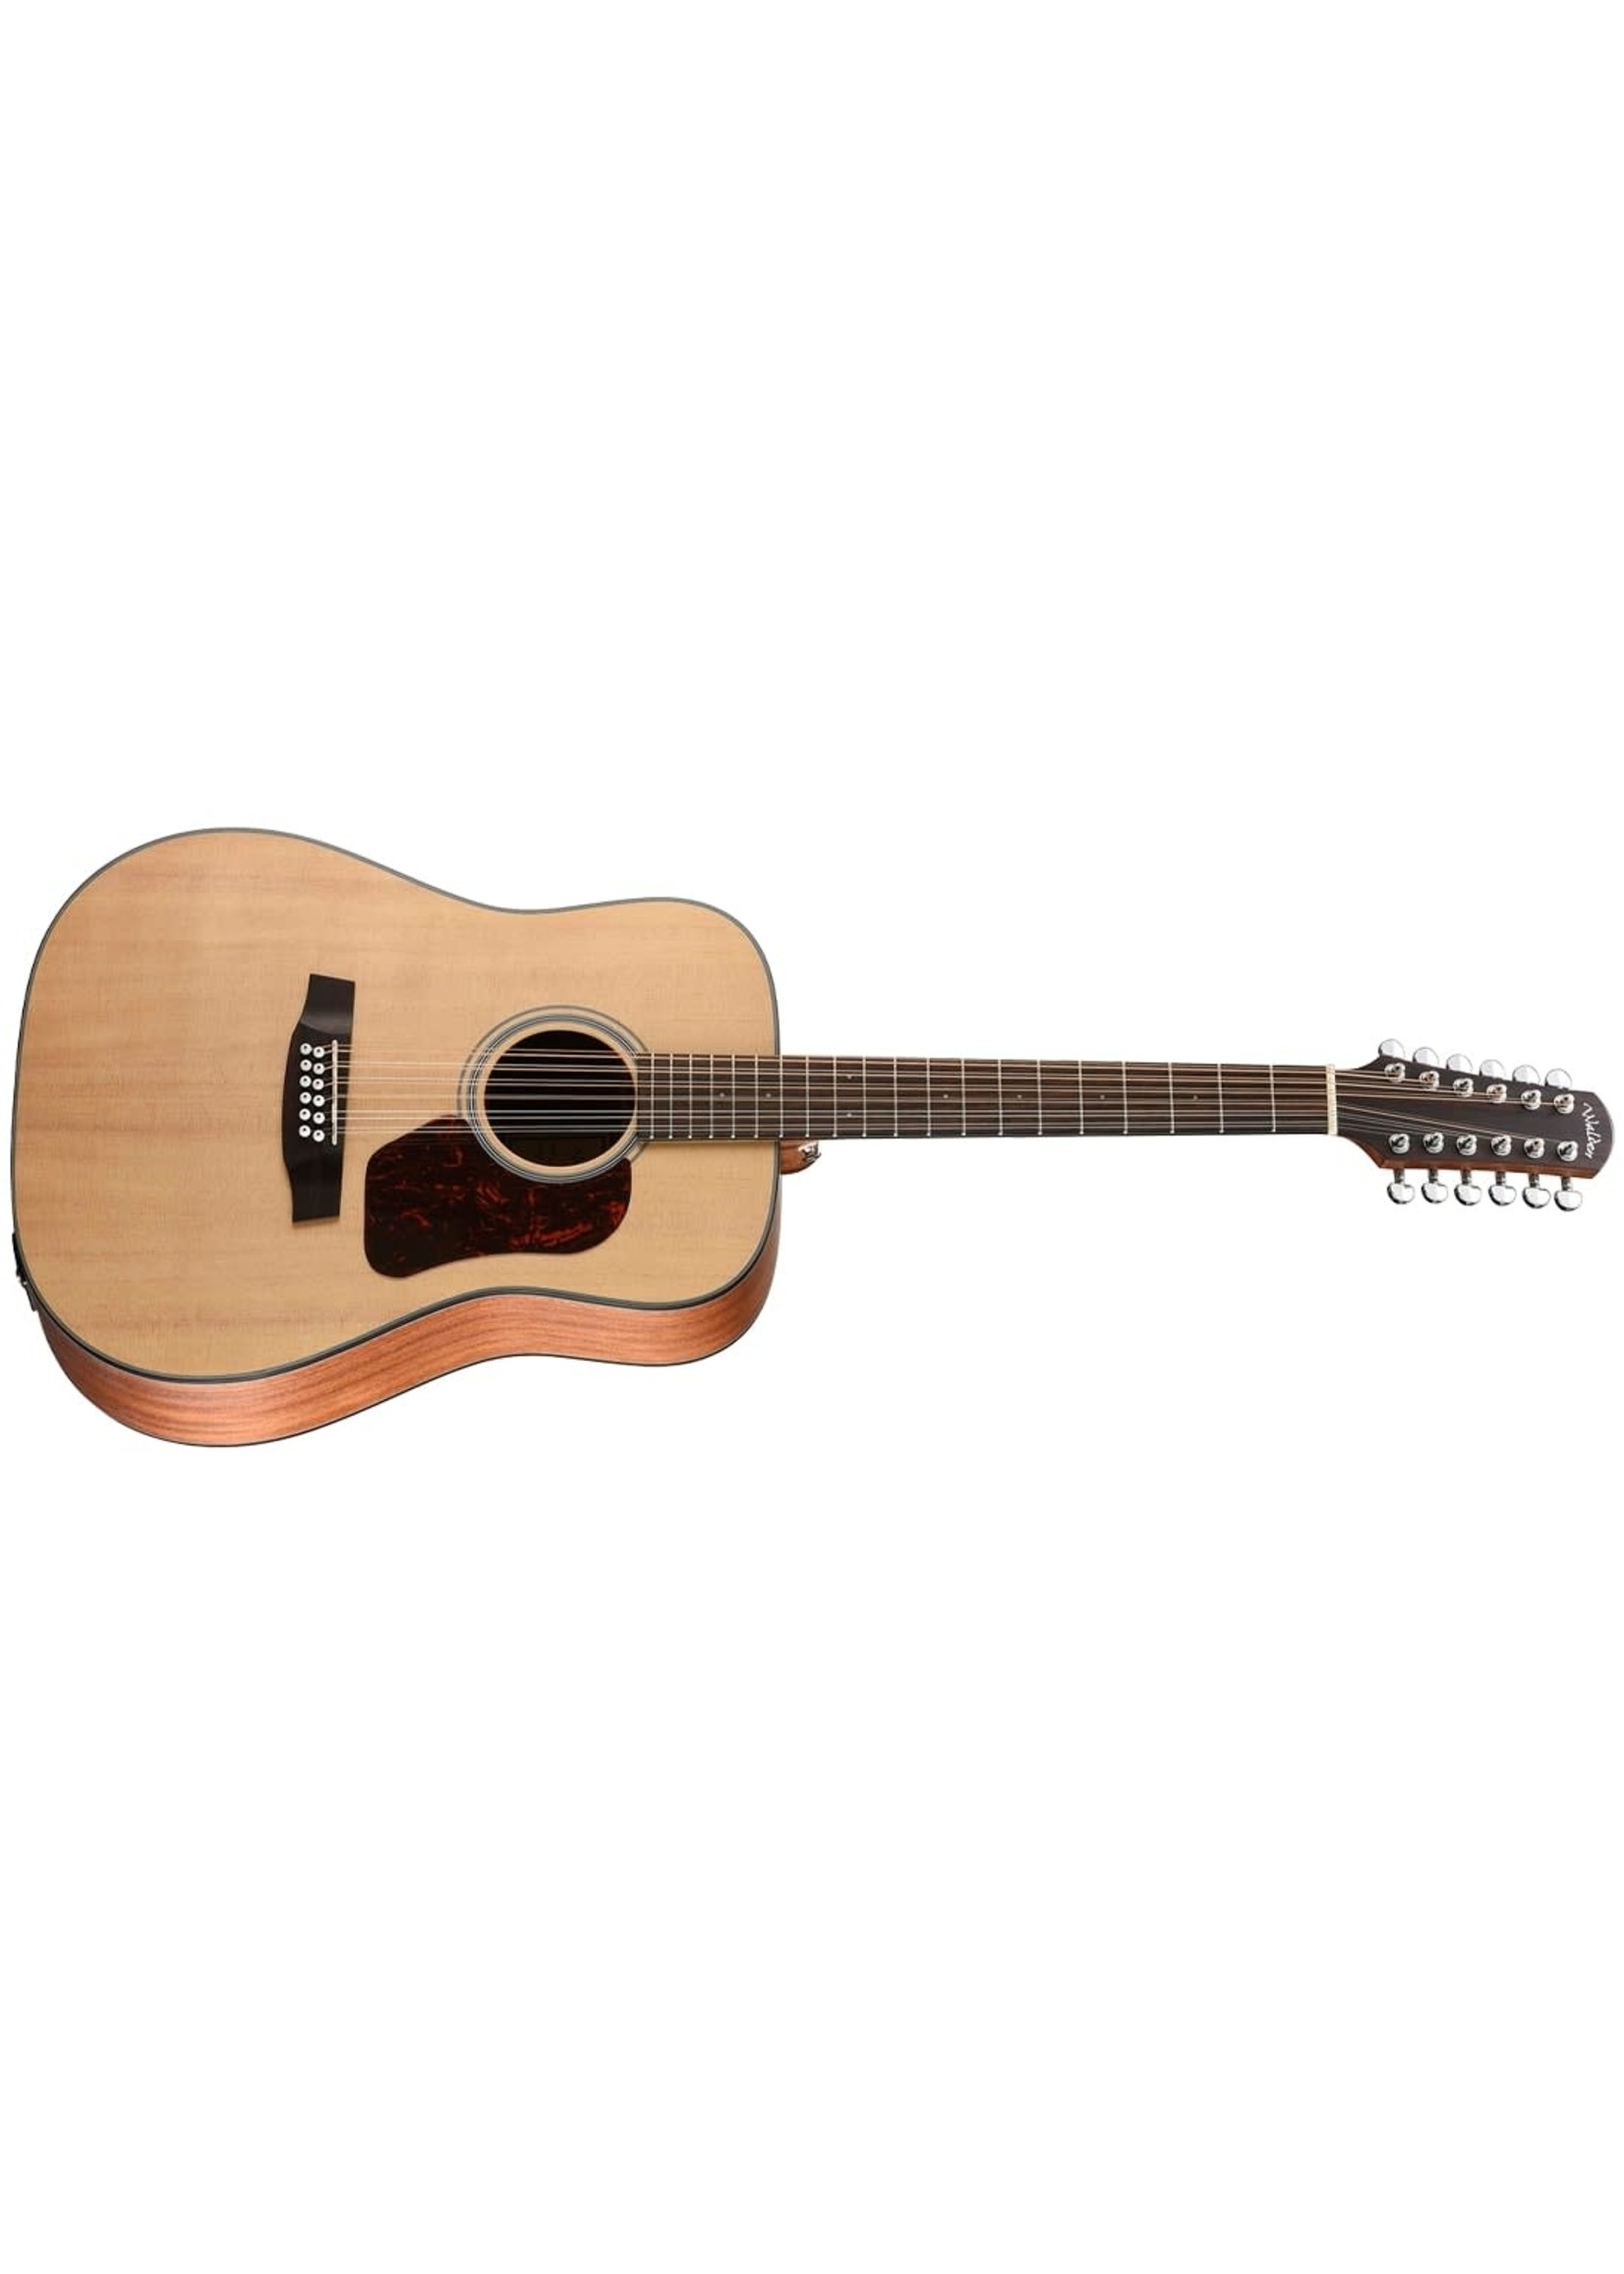 Walden Walden Guitars Natura 500 12-String Dreadnought Acoustic / Electric Guitar With Gig Bag, Open Pore Satin Item ID: D552E-W